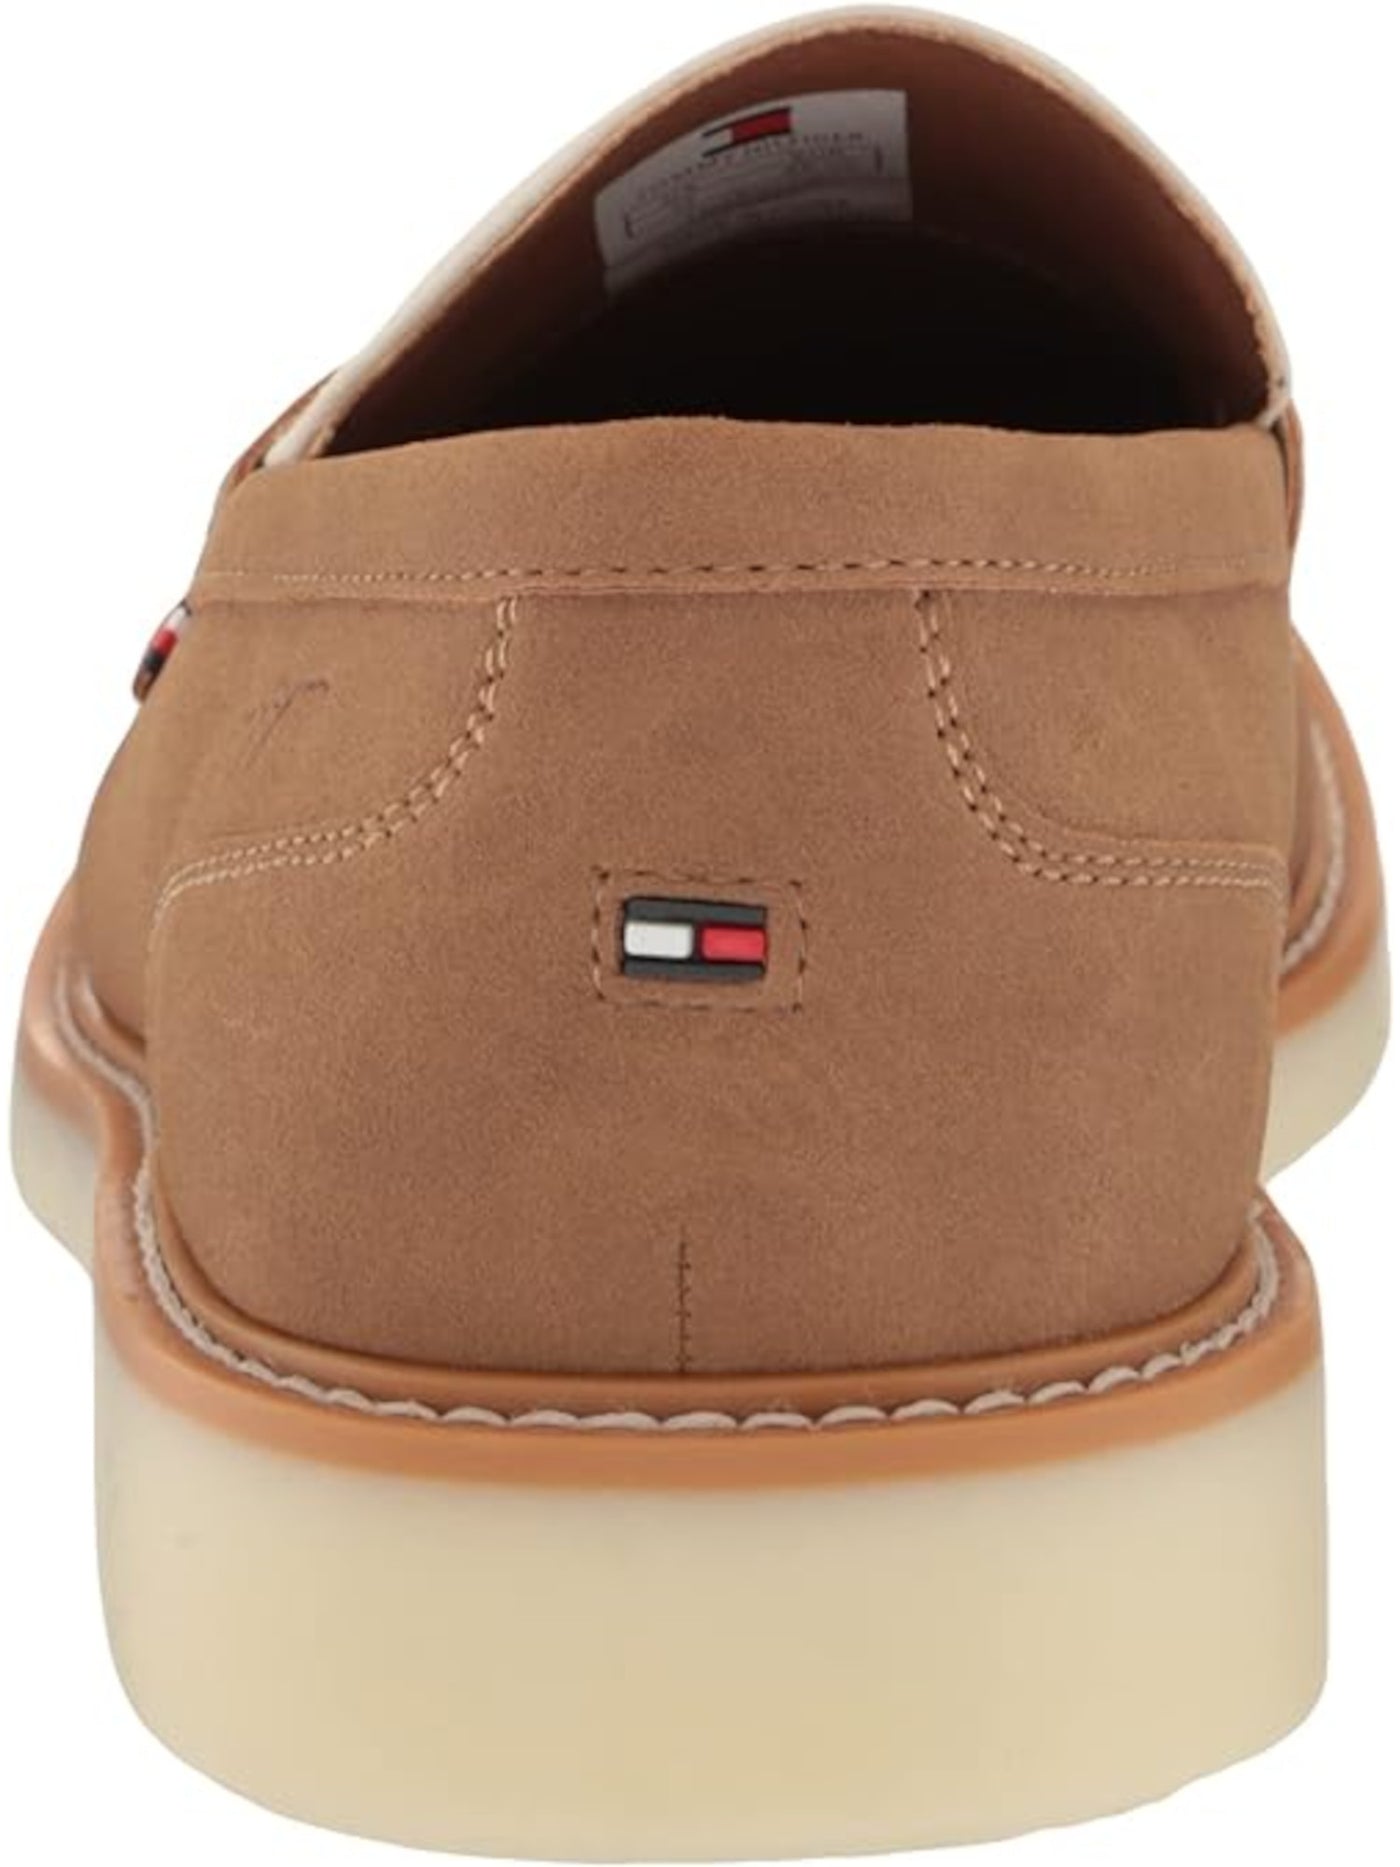 TOMMY HILFIGER Mens Beige Mixed Media Moc Toe Cushioned Sector Round Toe Platform Slip On Loafers Shoes 8 M